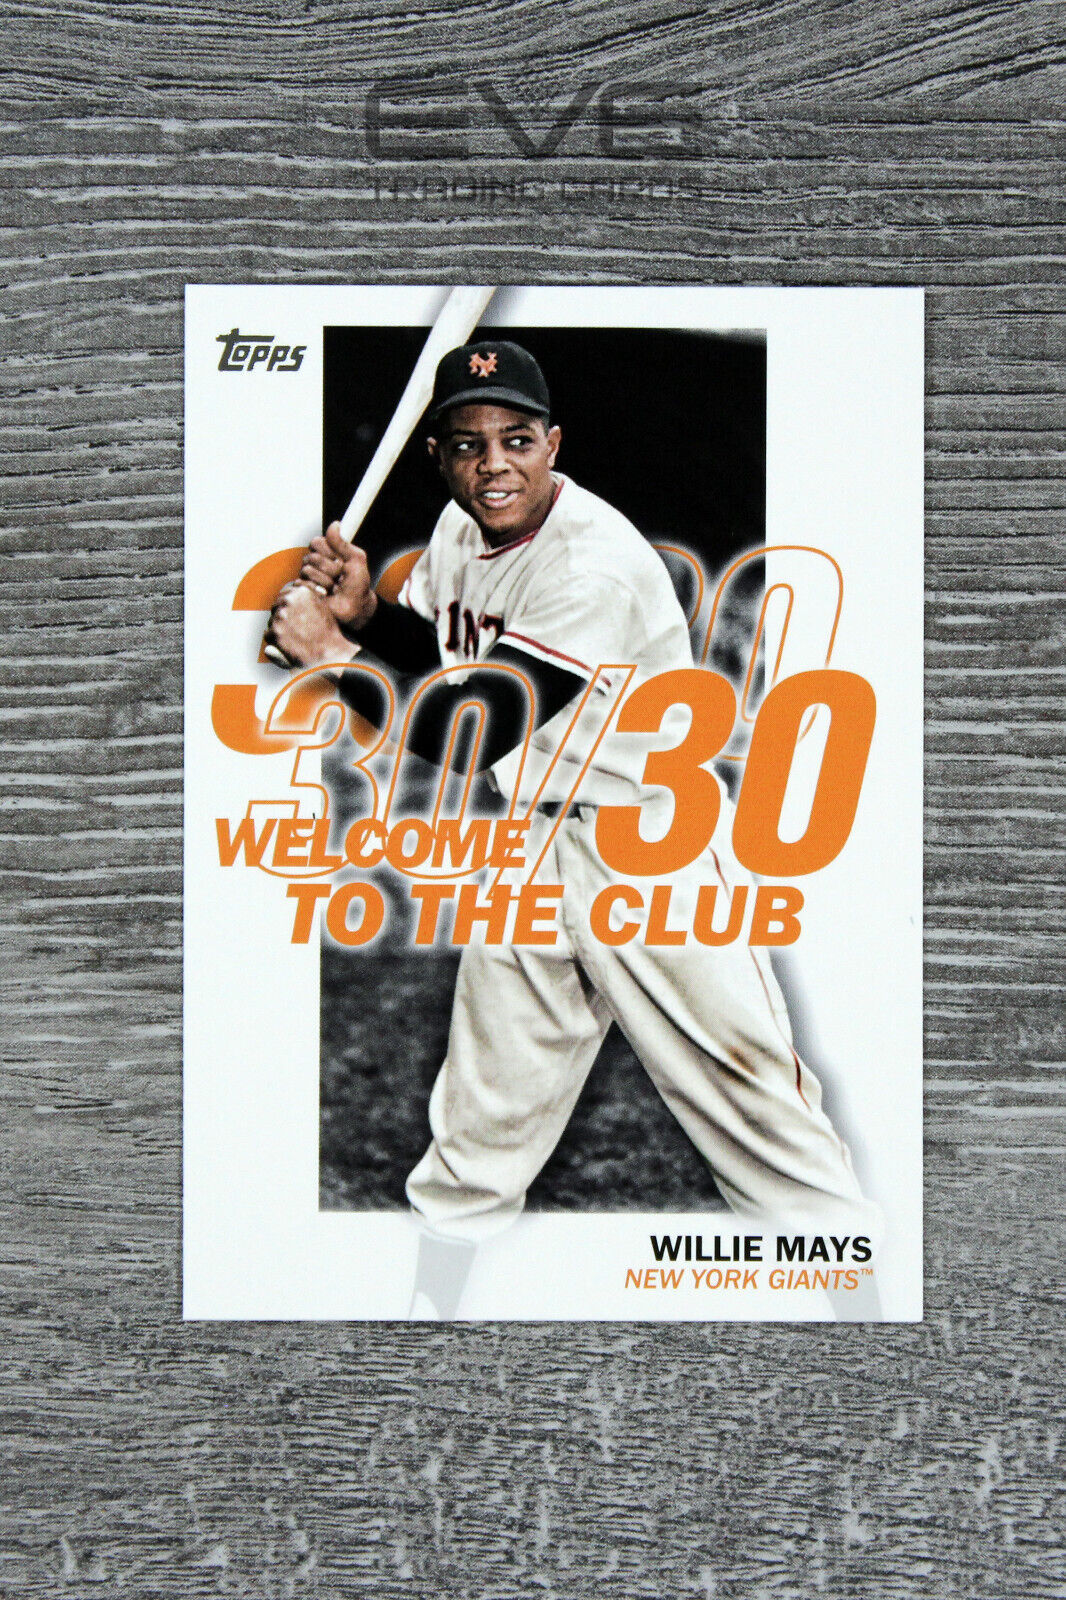 2023 Topps Baseball Card - WC-8 Willie Mays 30-30 Welcome to the Club - NM/M